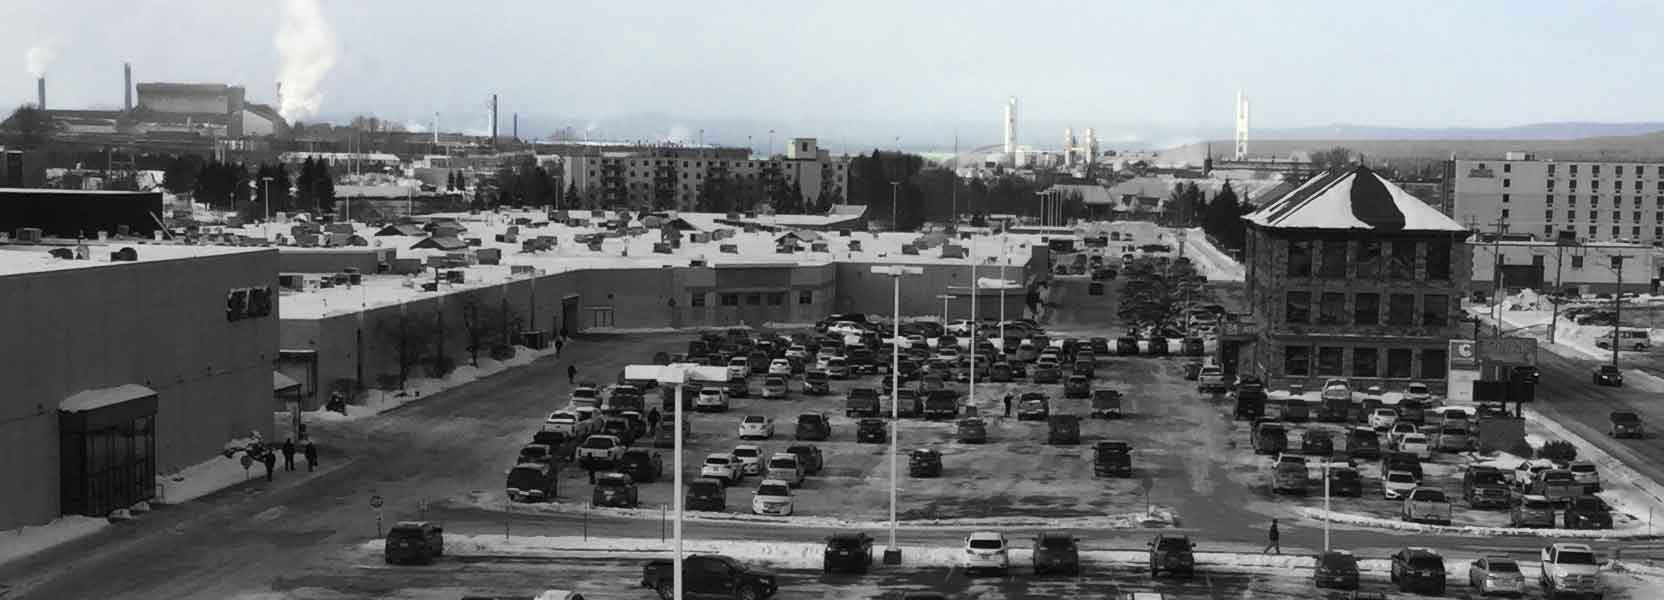 overview of the Station Mall parking lot